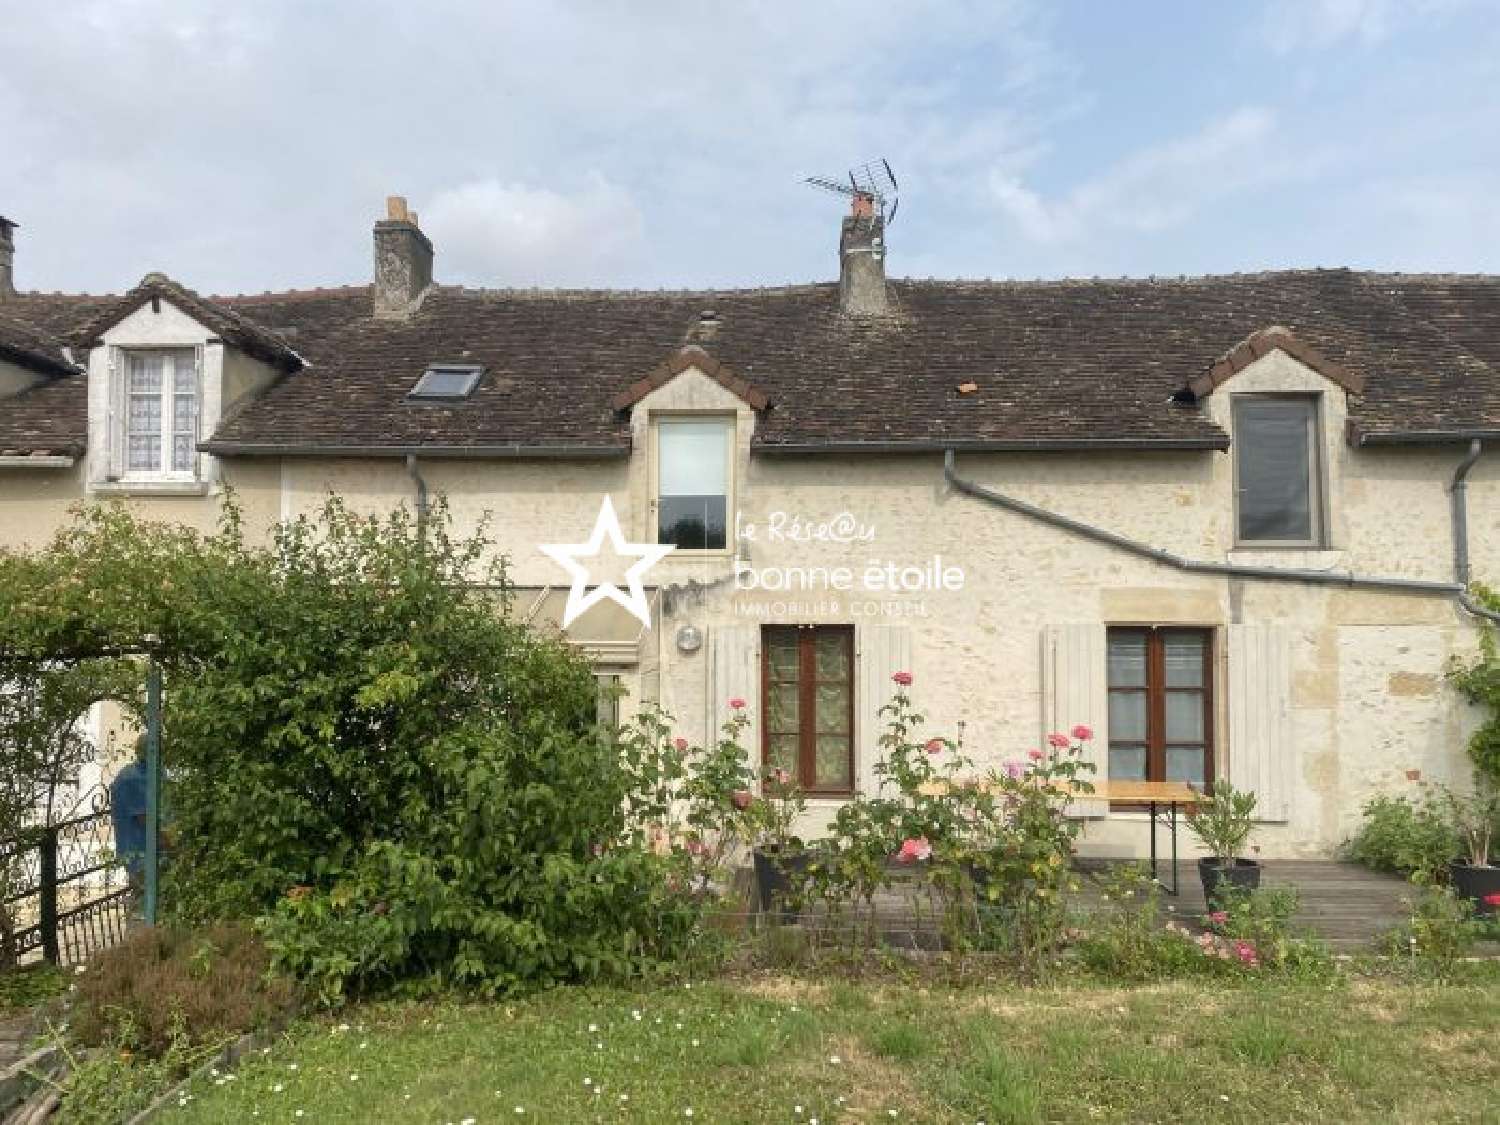  for sale house Mamers Sarthe 1